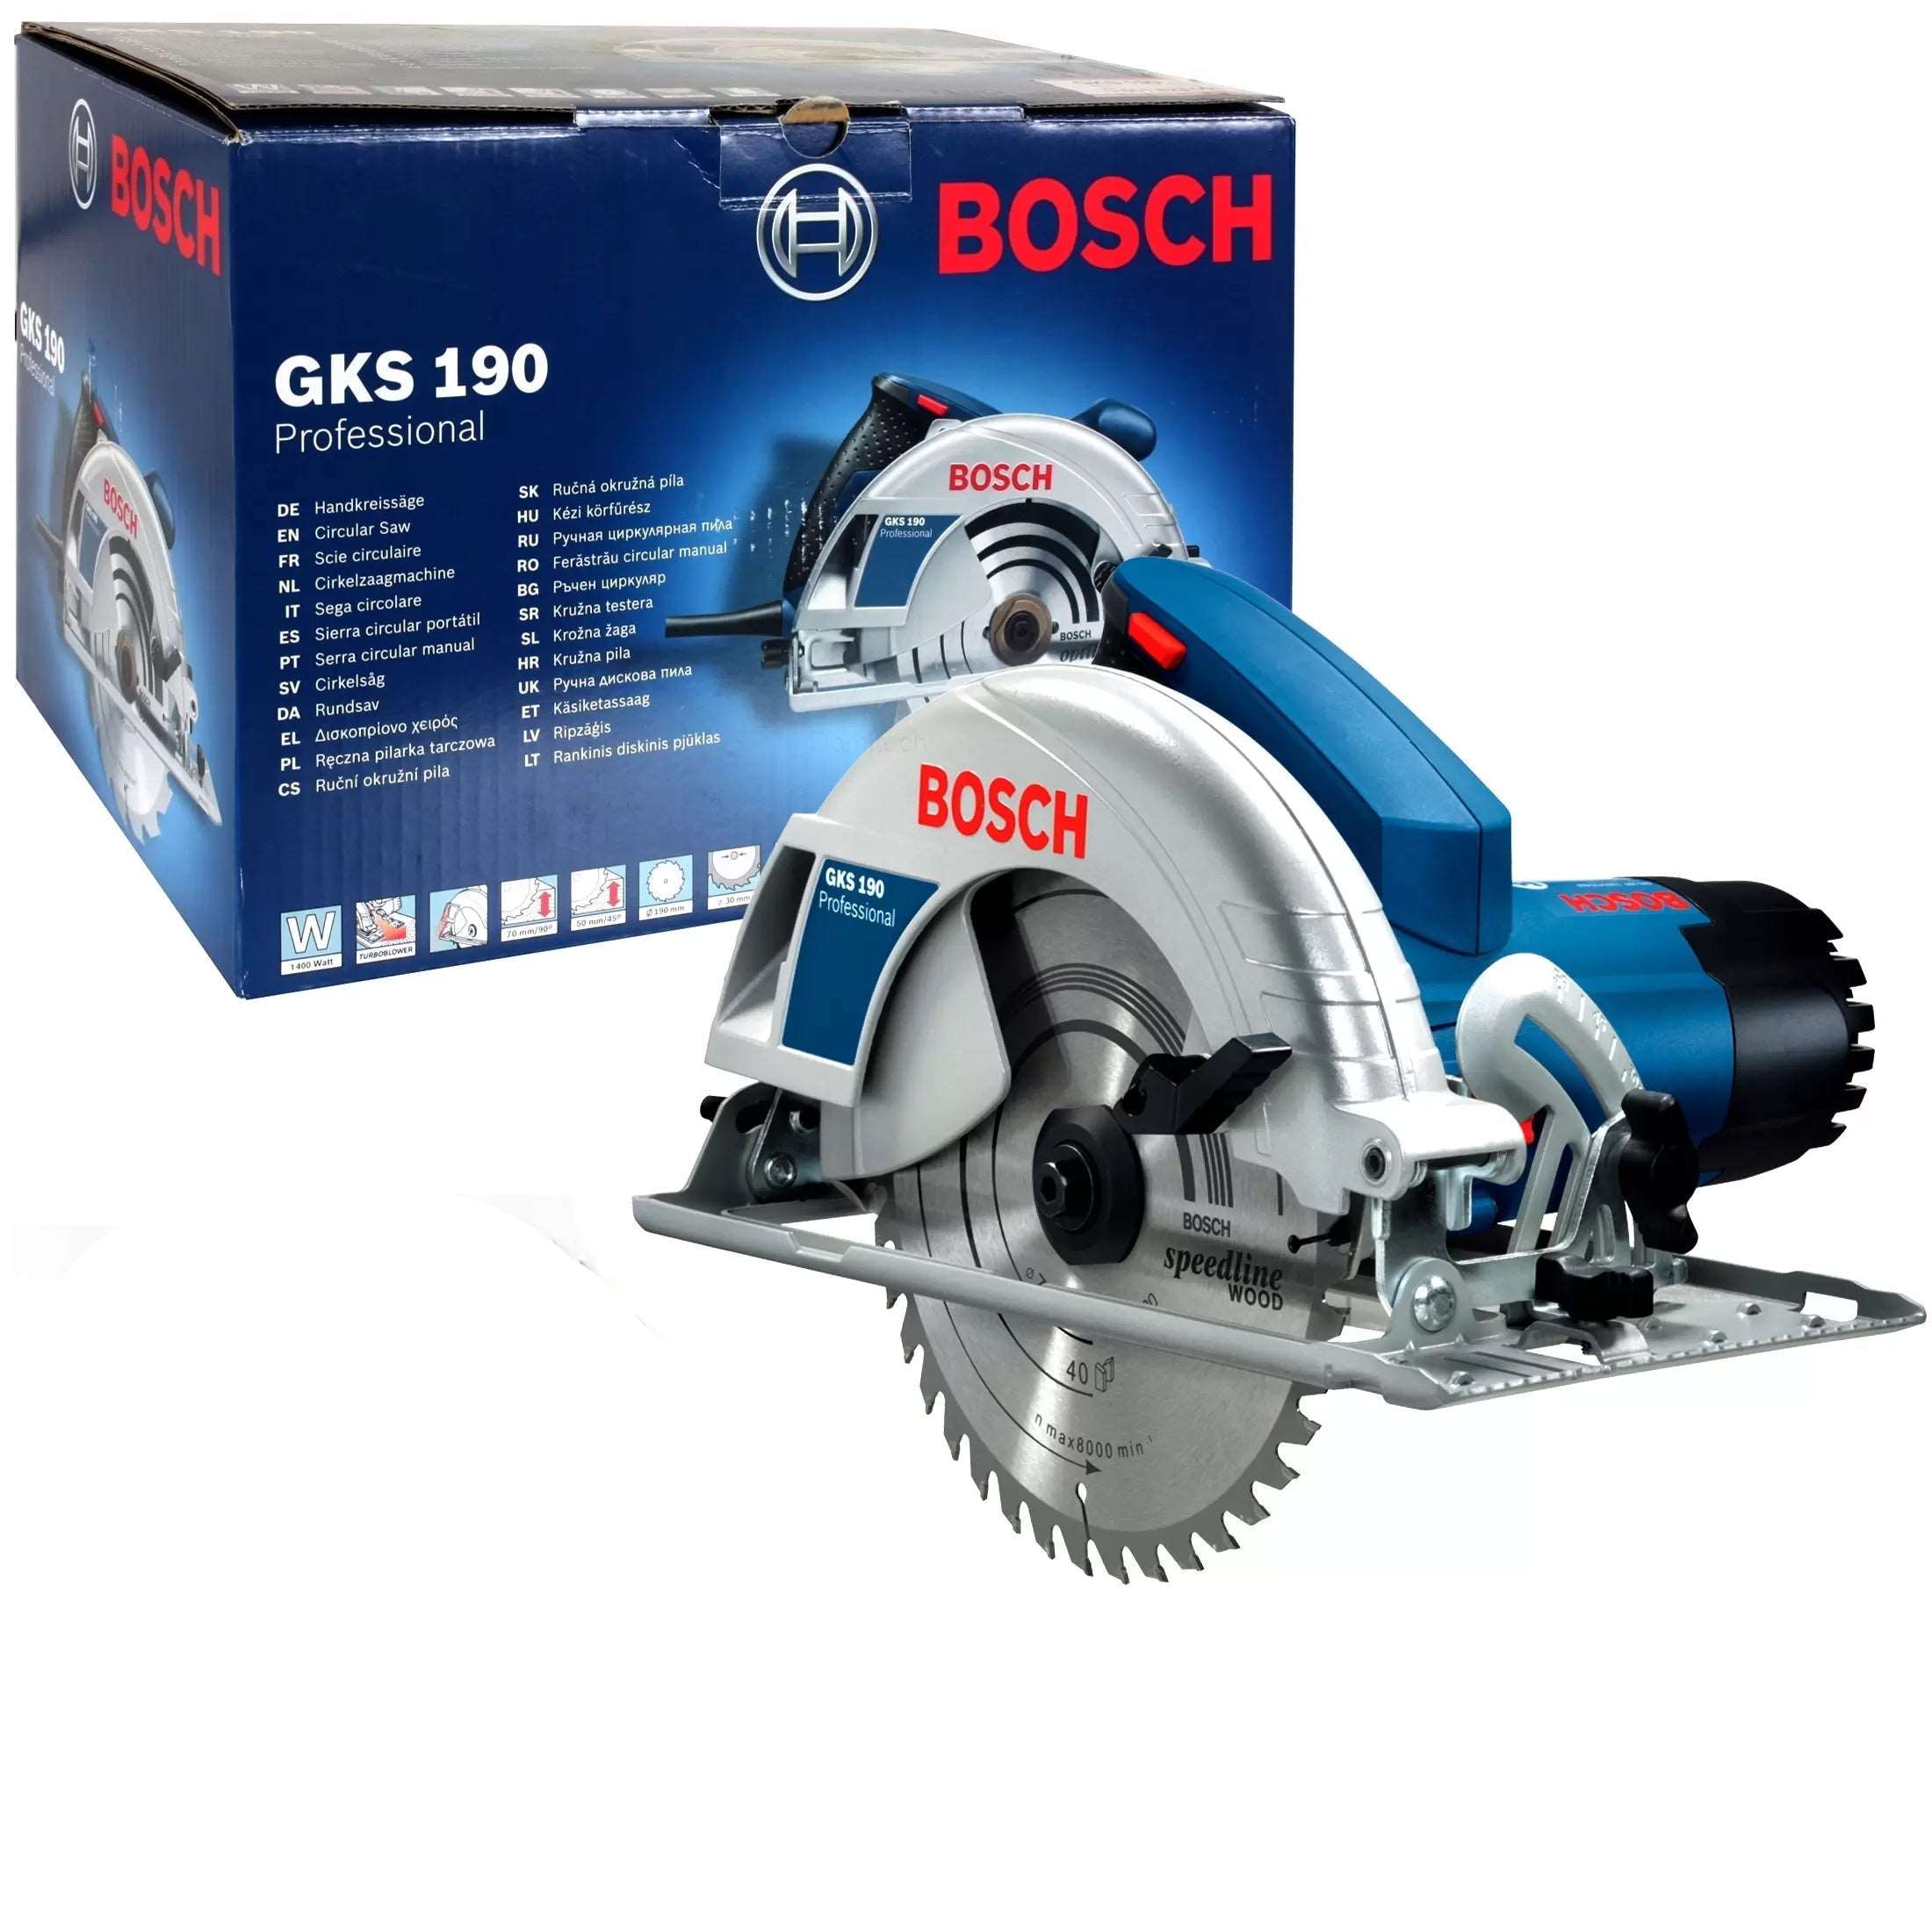 Bosch Professional Hand-Held Circular Saw GKS 190 0601623000 Power Tool Services